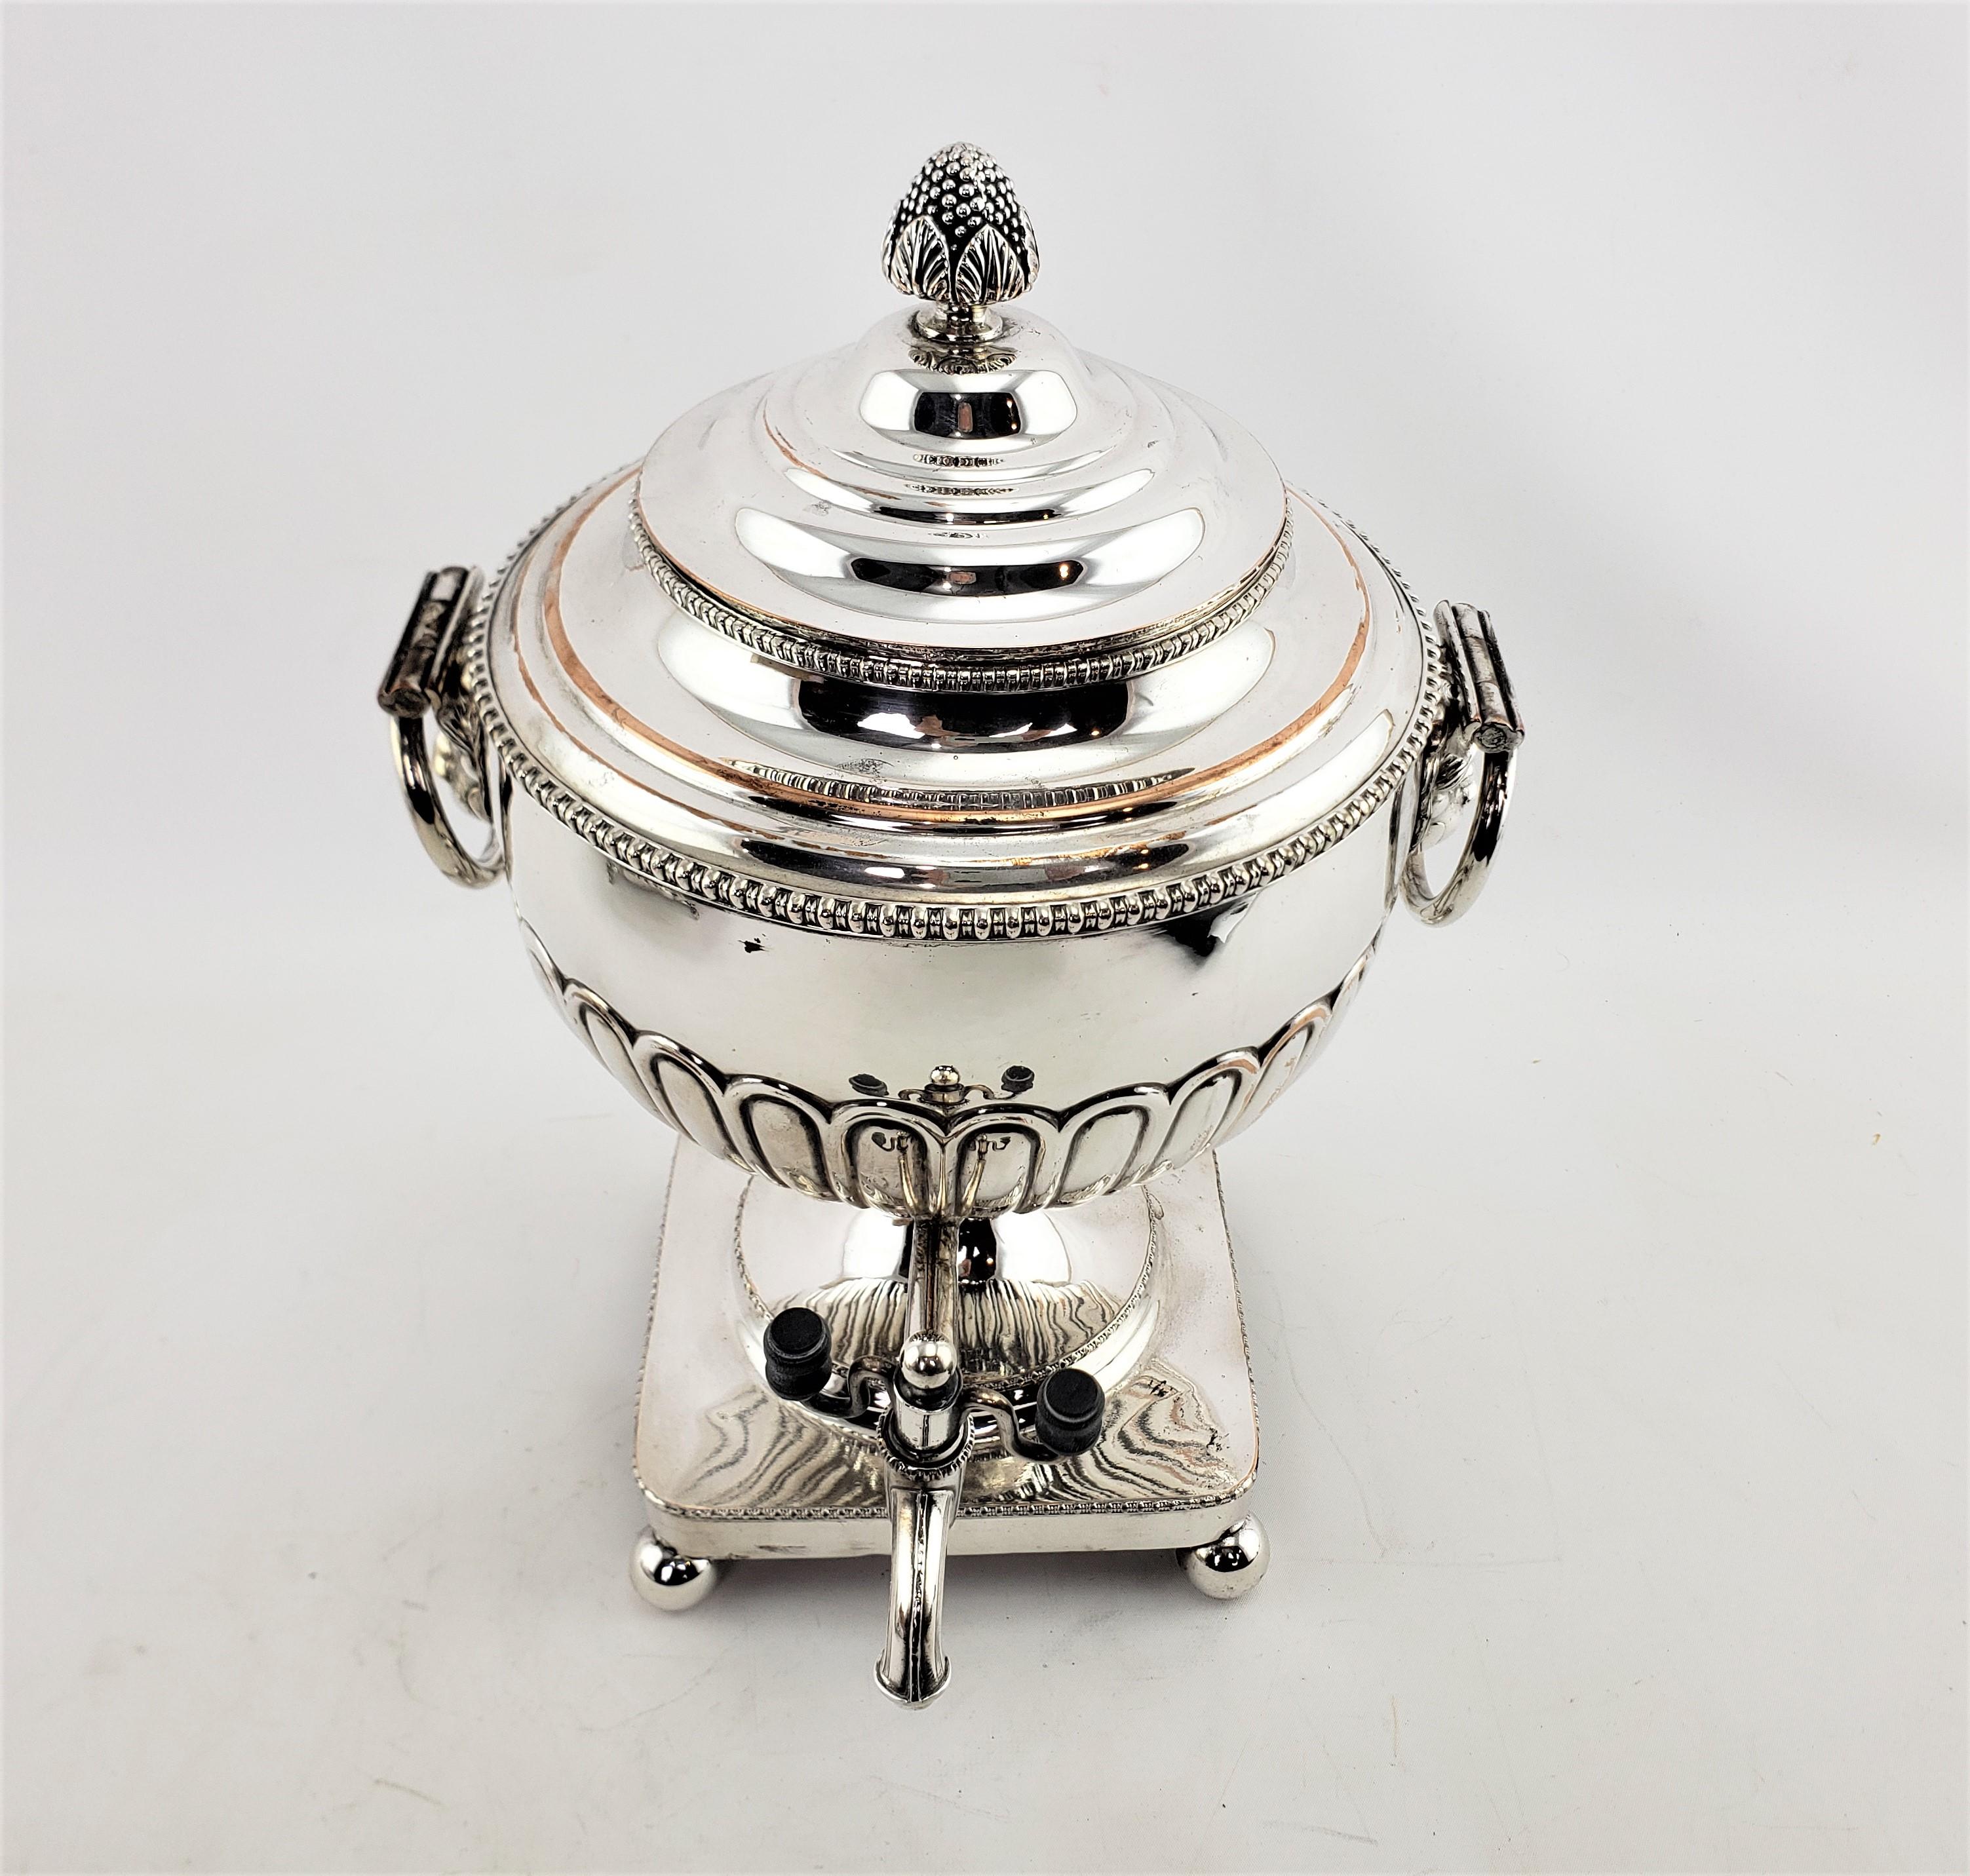 This antique hot water urn or server is unsigned, but presumed to have originated from England and date to approximately 1880 and done in a Georgian style. This urn is composed of copper with a silver plated finish with tapered sides and raised